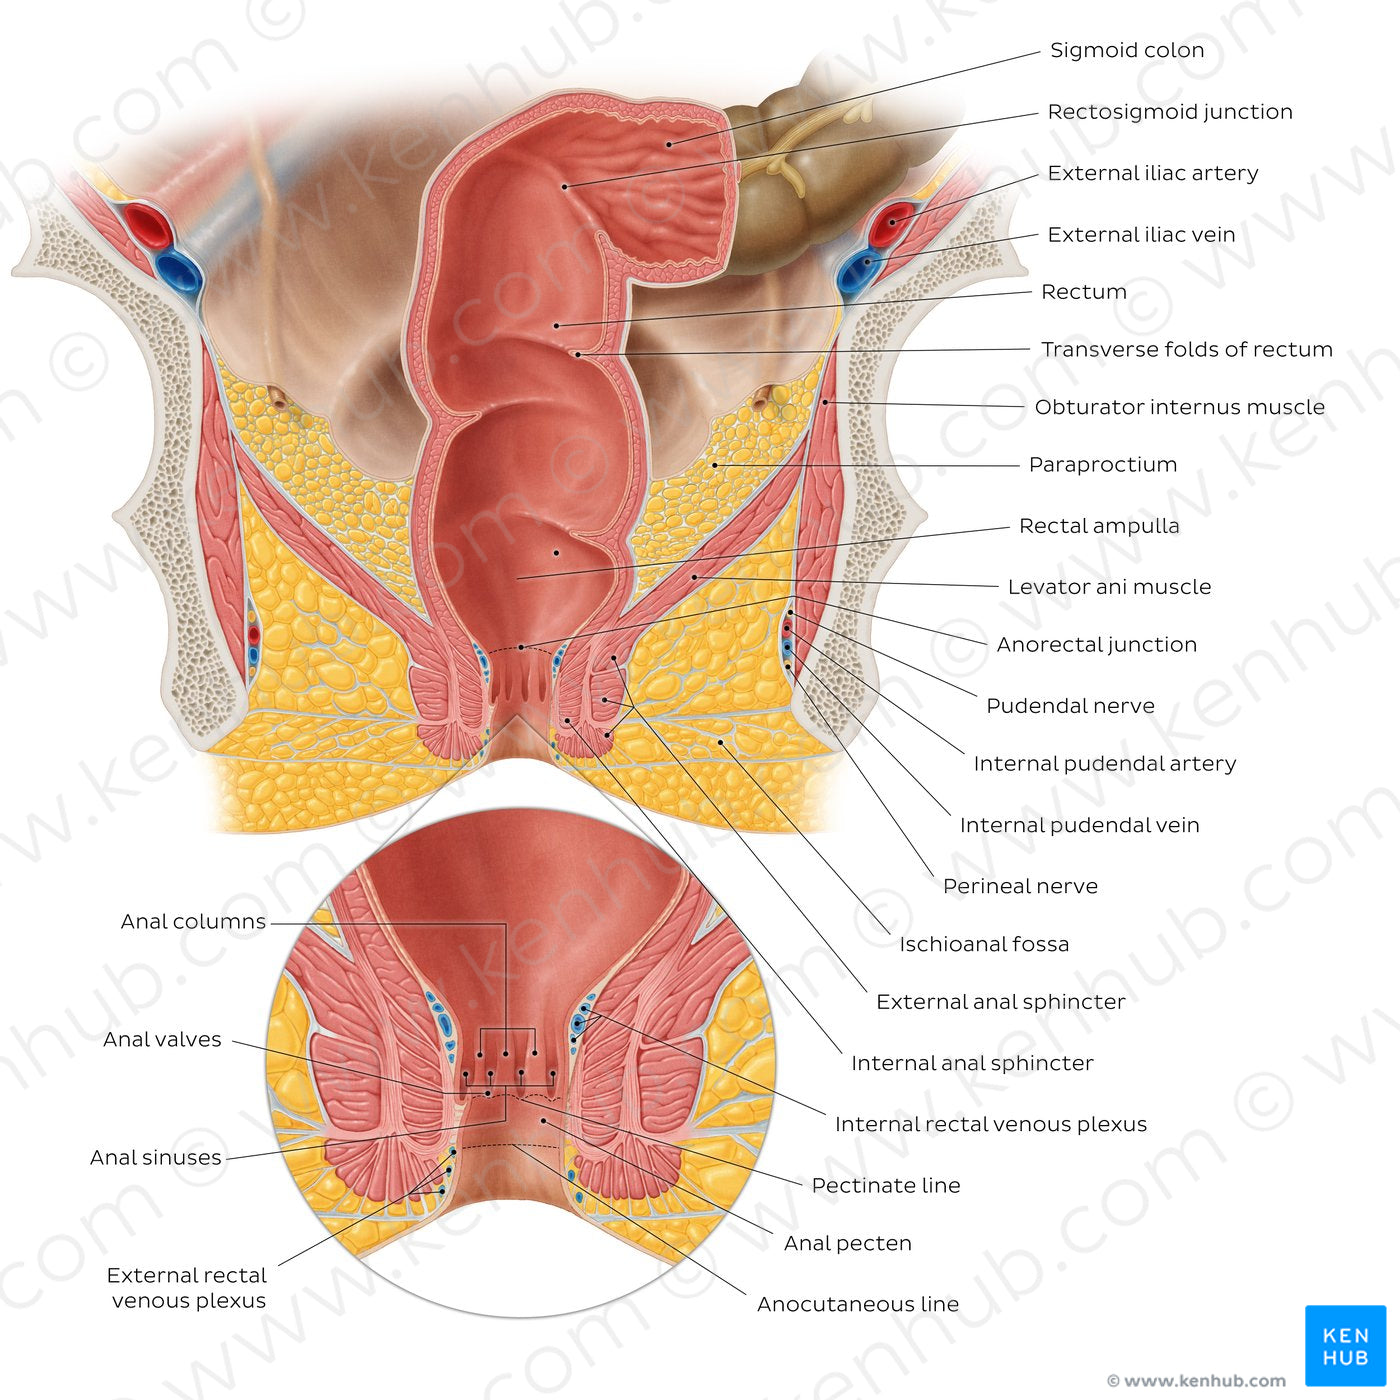 Rectum and anal canal (English)